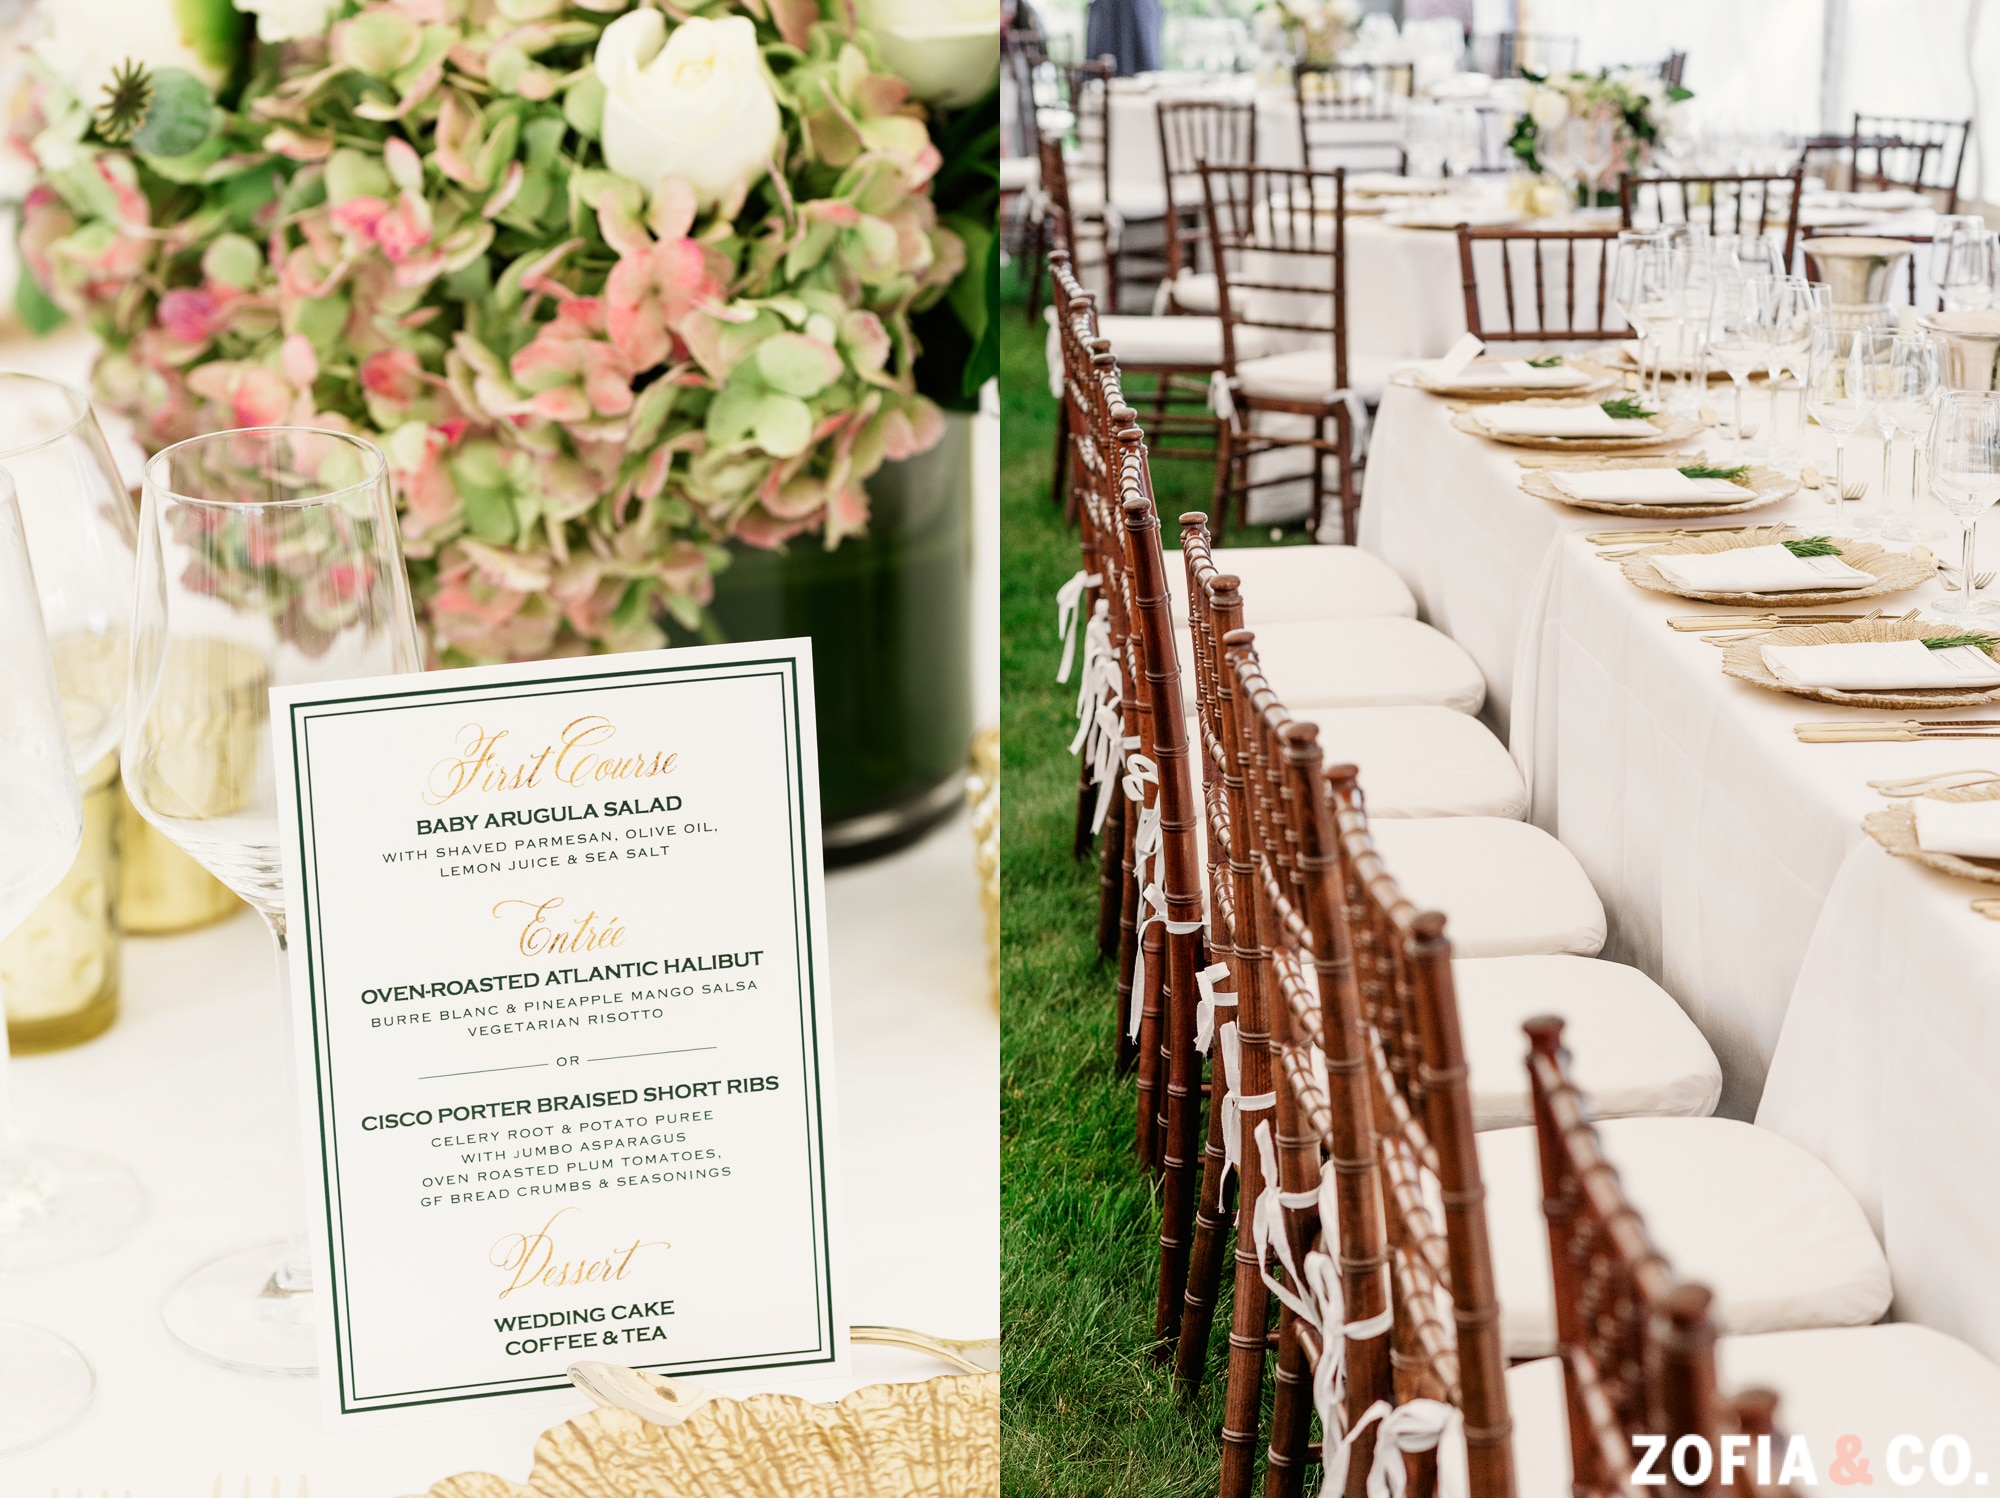 St Mary's Nantucket Wedding in Tom Nevers by Zofia & Co.